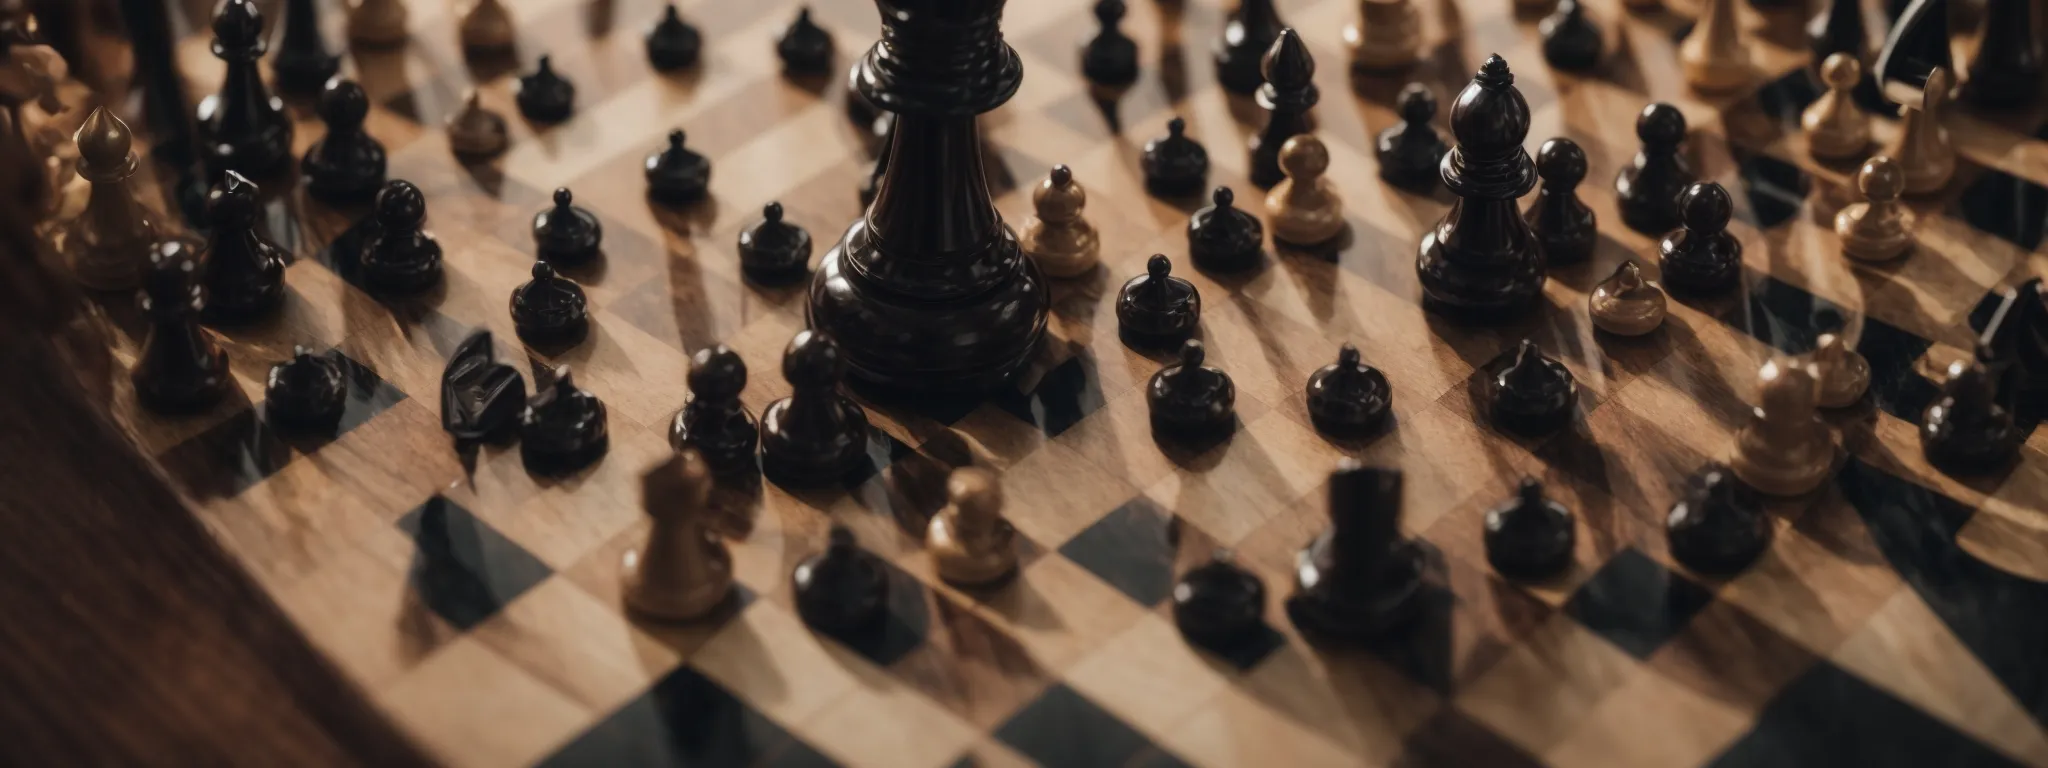 a chessboard with a king piece standing tall surrounded by pawns, symbolizing strategic power and dominance in the game.